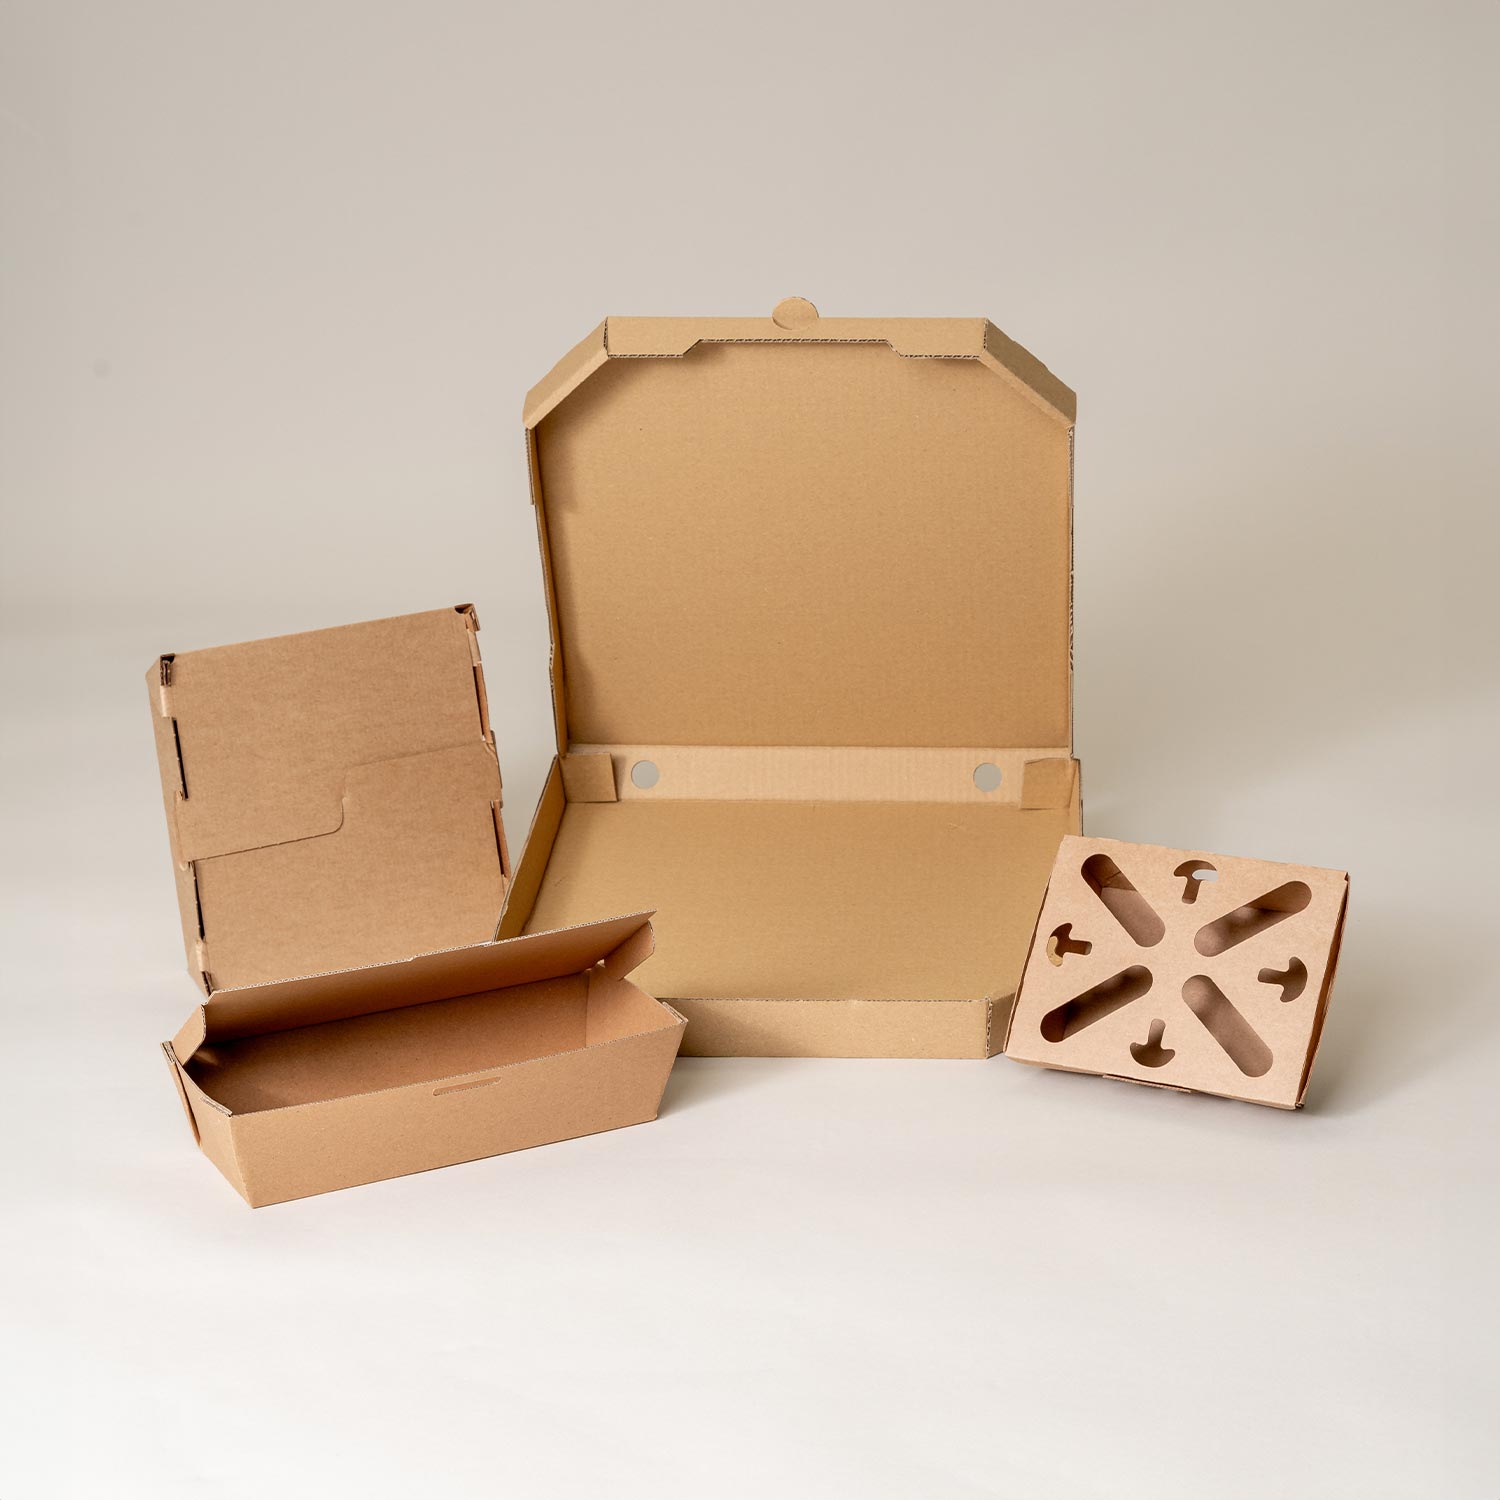 5 Innovative Hot Food Packaging Solutions to Enhance Your Customer